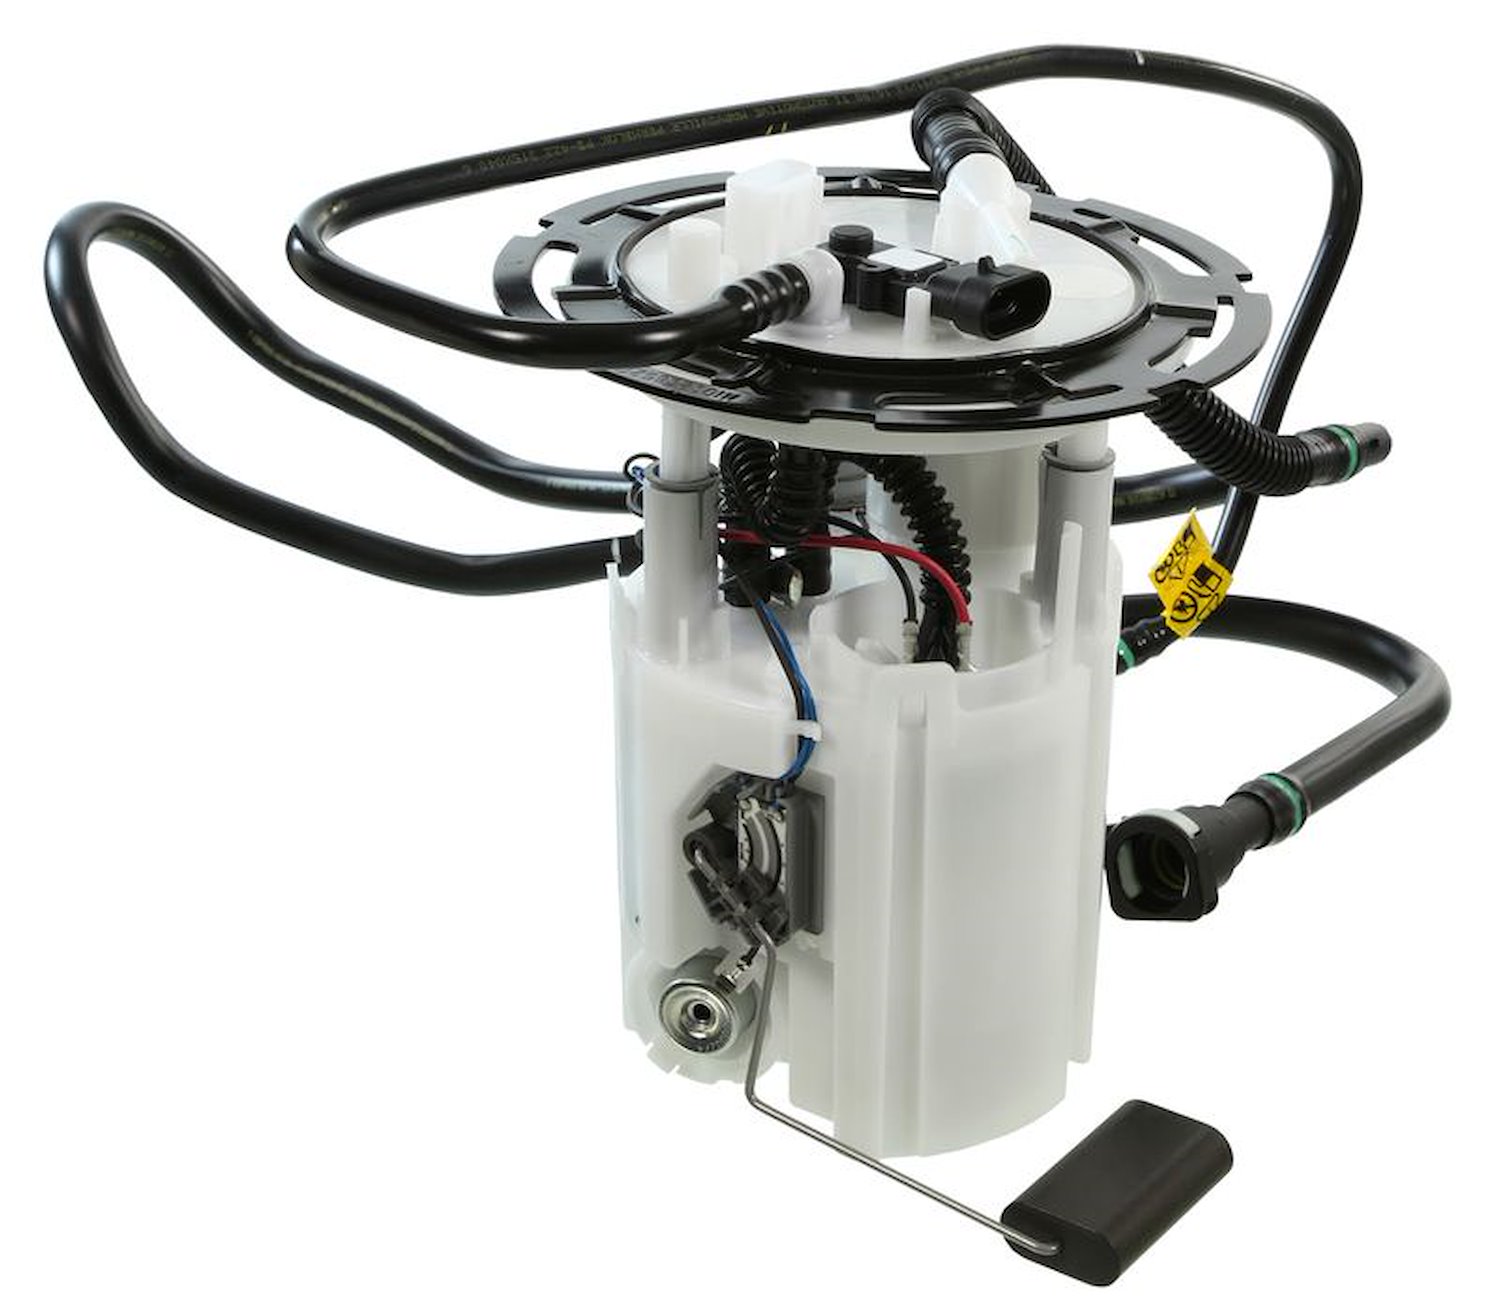 OE GM Replacement Electric Fuel Pump Module Assembly for 2007-2008 Chevy Malibu